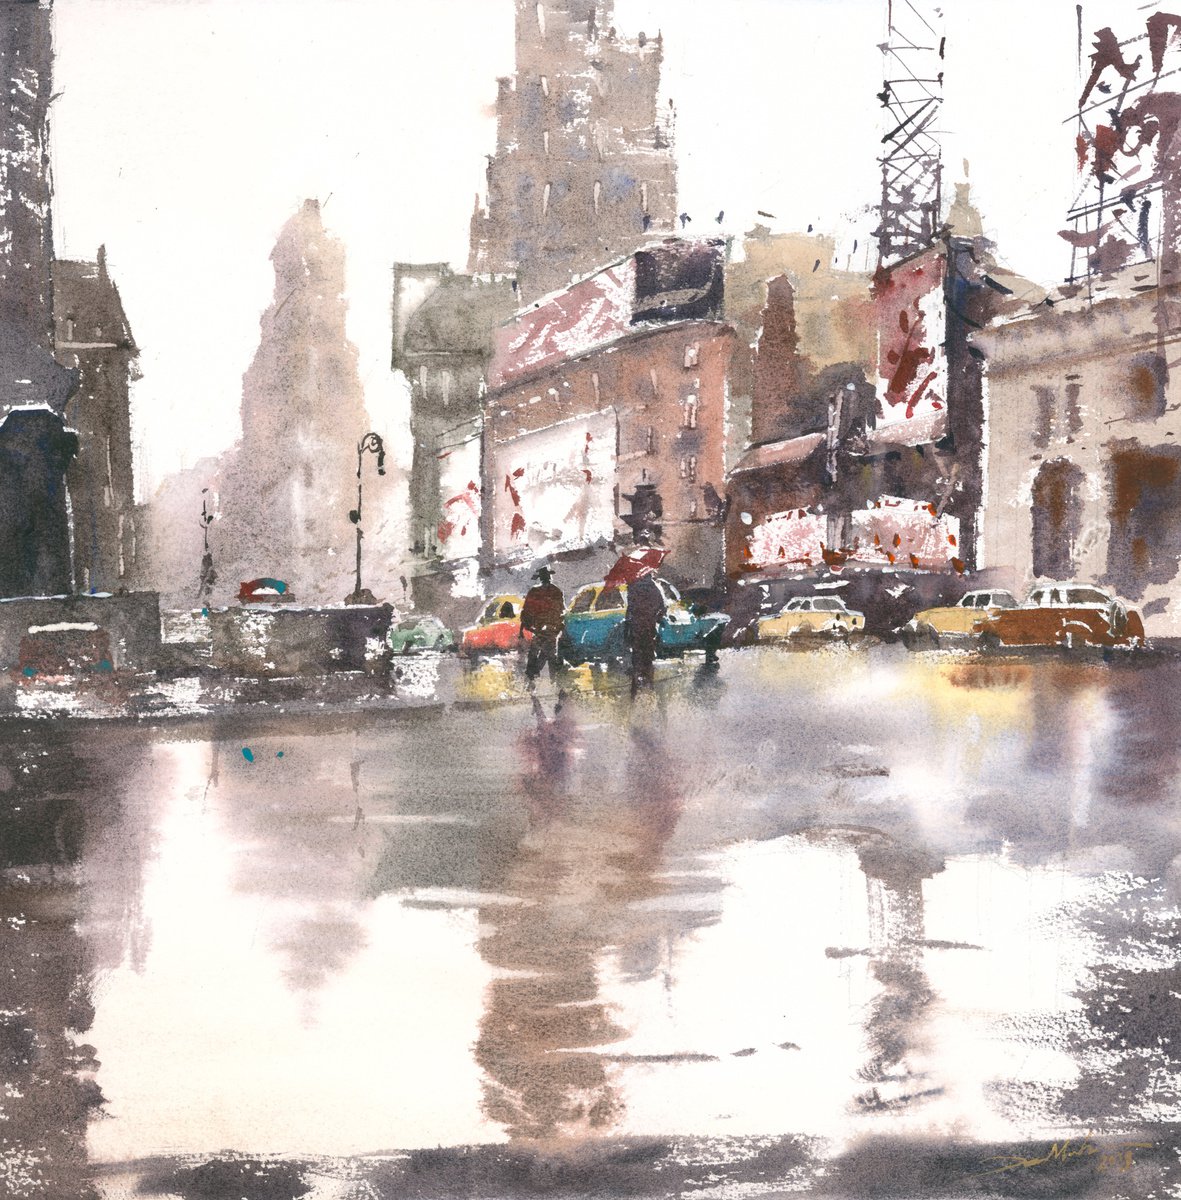 Rainy Day in New York by Minh Dam